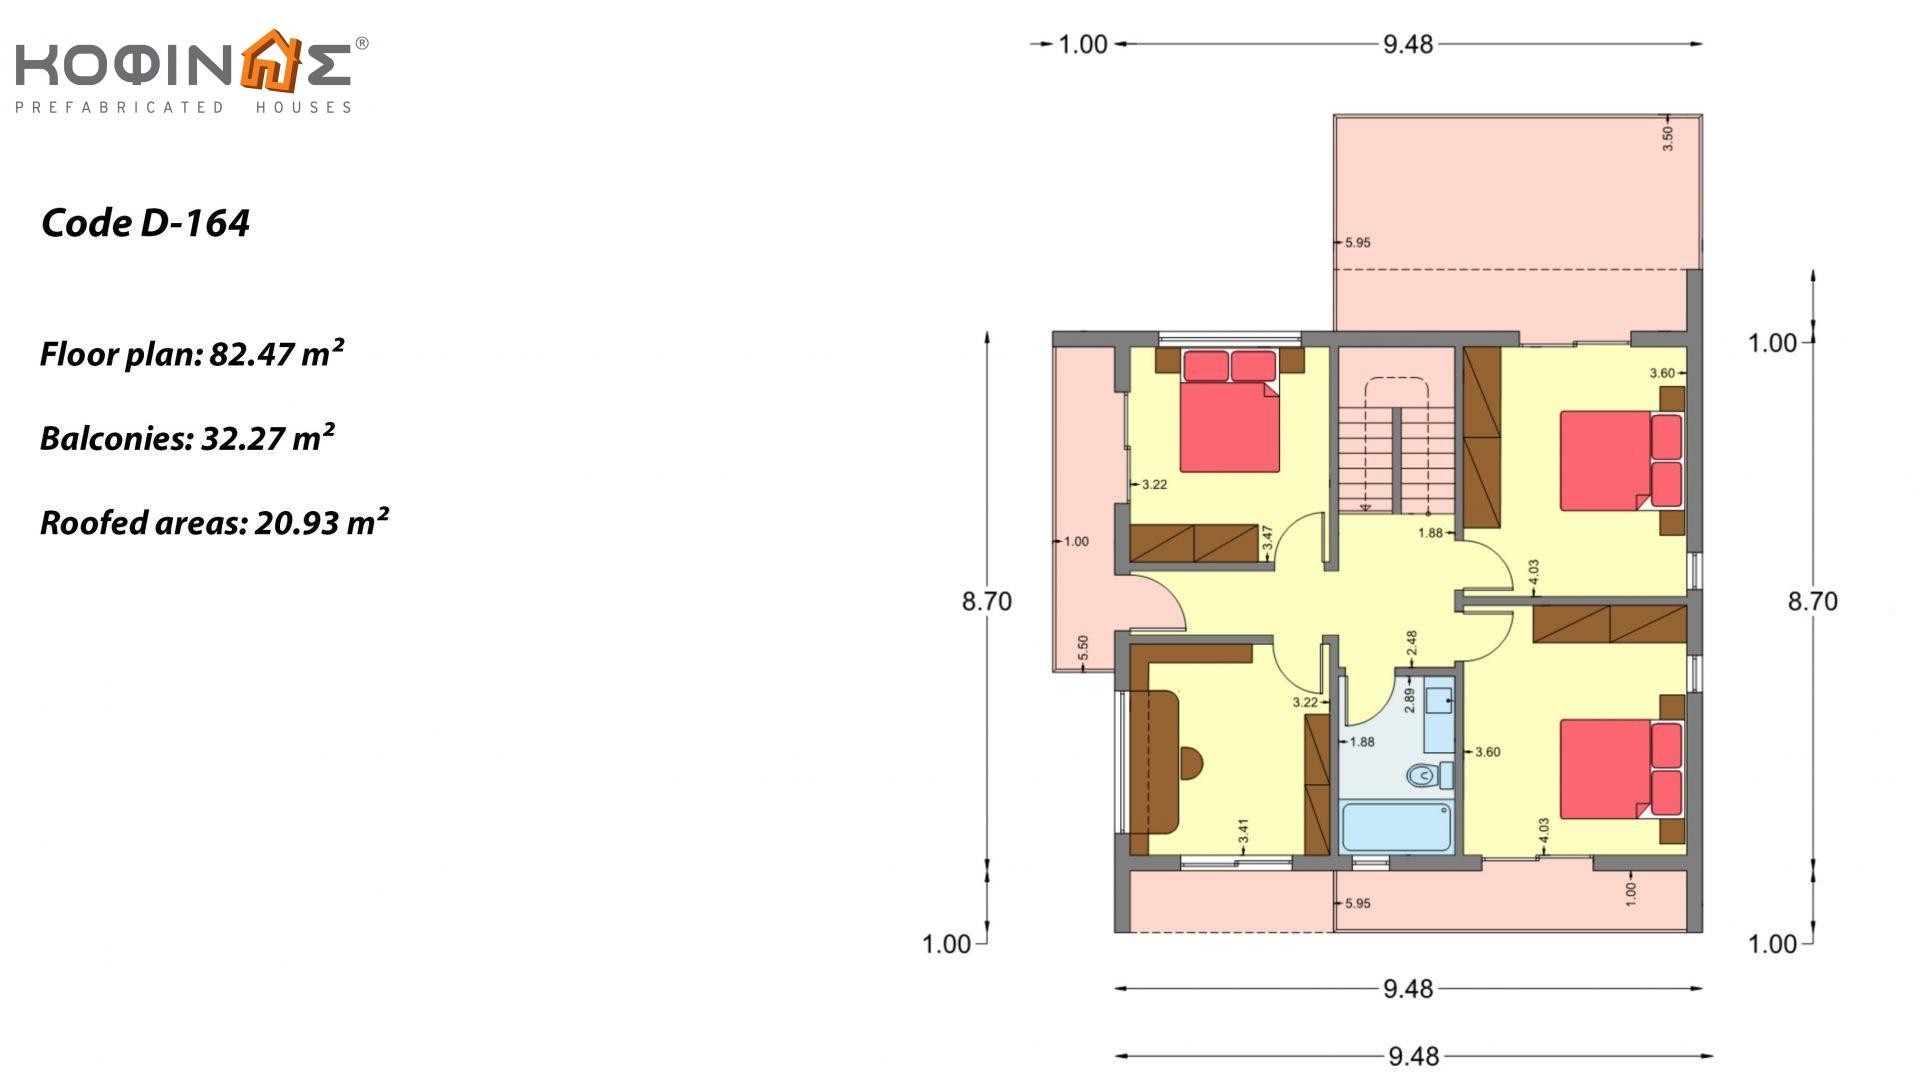 2-story house D-164, total surface of 164.94 m² ,+Garage 20.82 m²(=185.76 m²),covered roofed areas 32.38 m²,balconies 32.27 m²